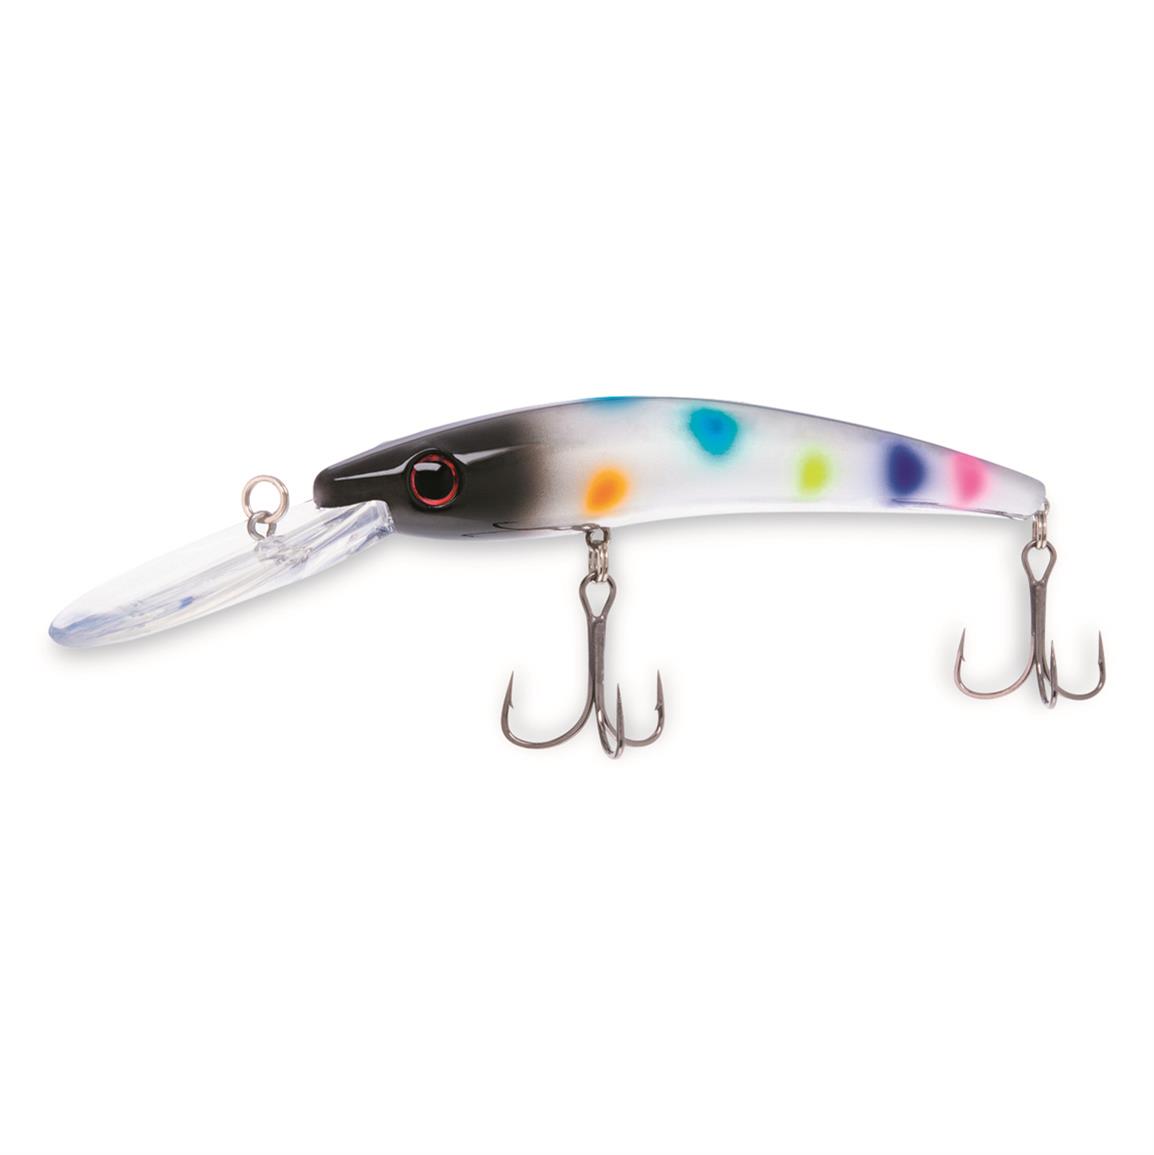 The new Jigging Rap Magnum falls fast and true and helps ice